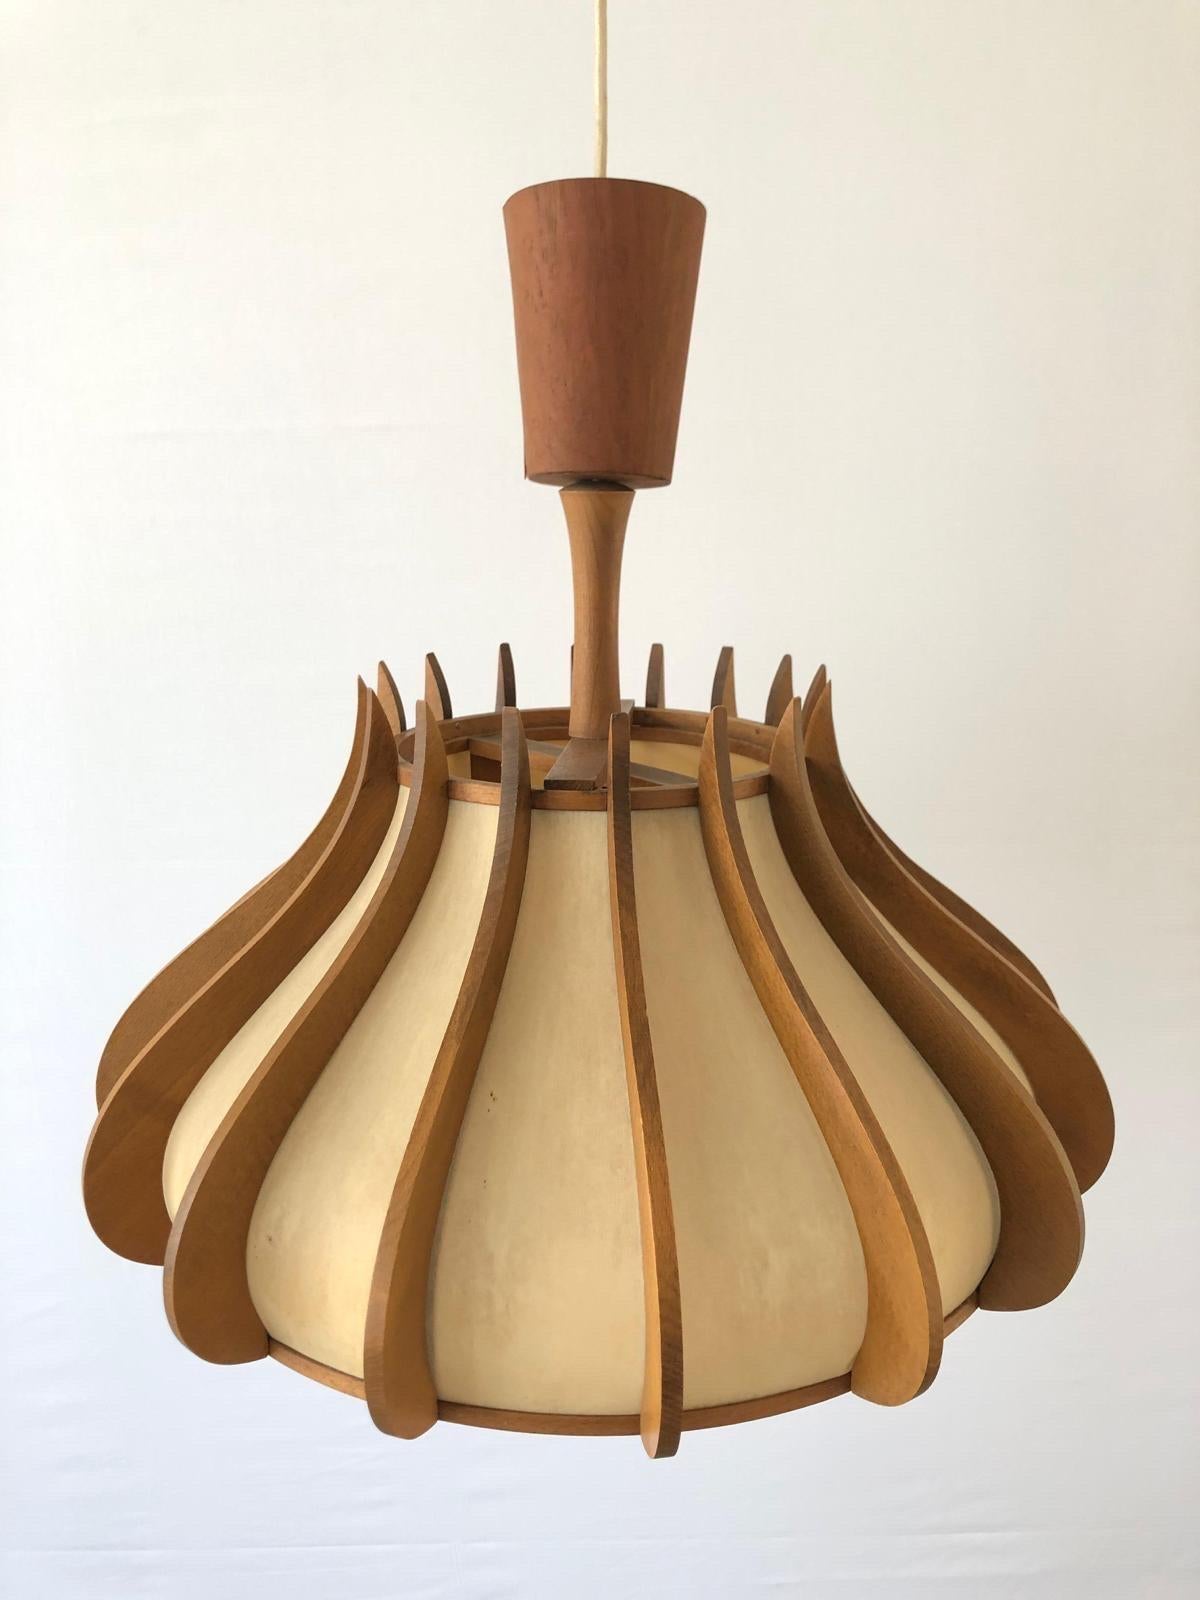 Unusual design Wood and Plastic Paper Large Pendant Lamp, 1960s, Germany

Elegant and minimal design hanging lamp

Lampshade is in good condition and very clean. 
This lamp works with E27 light bulb. Max 100W
Wired and suitable to use with 220V and